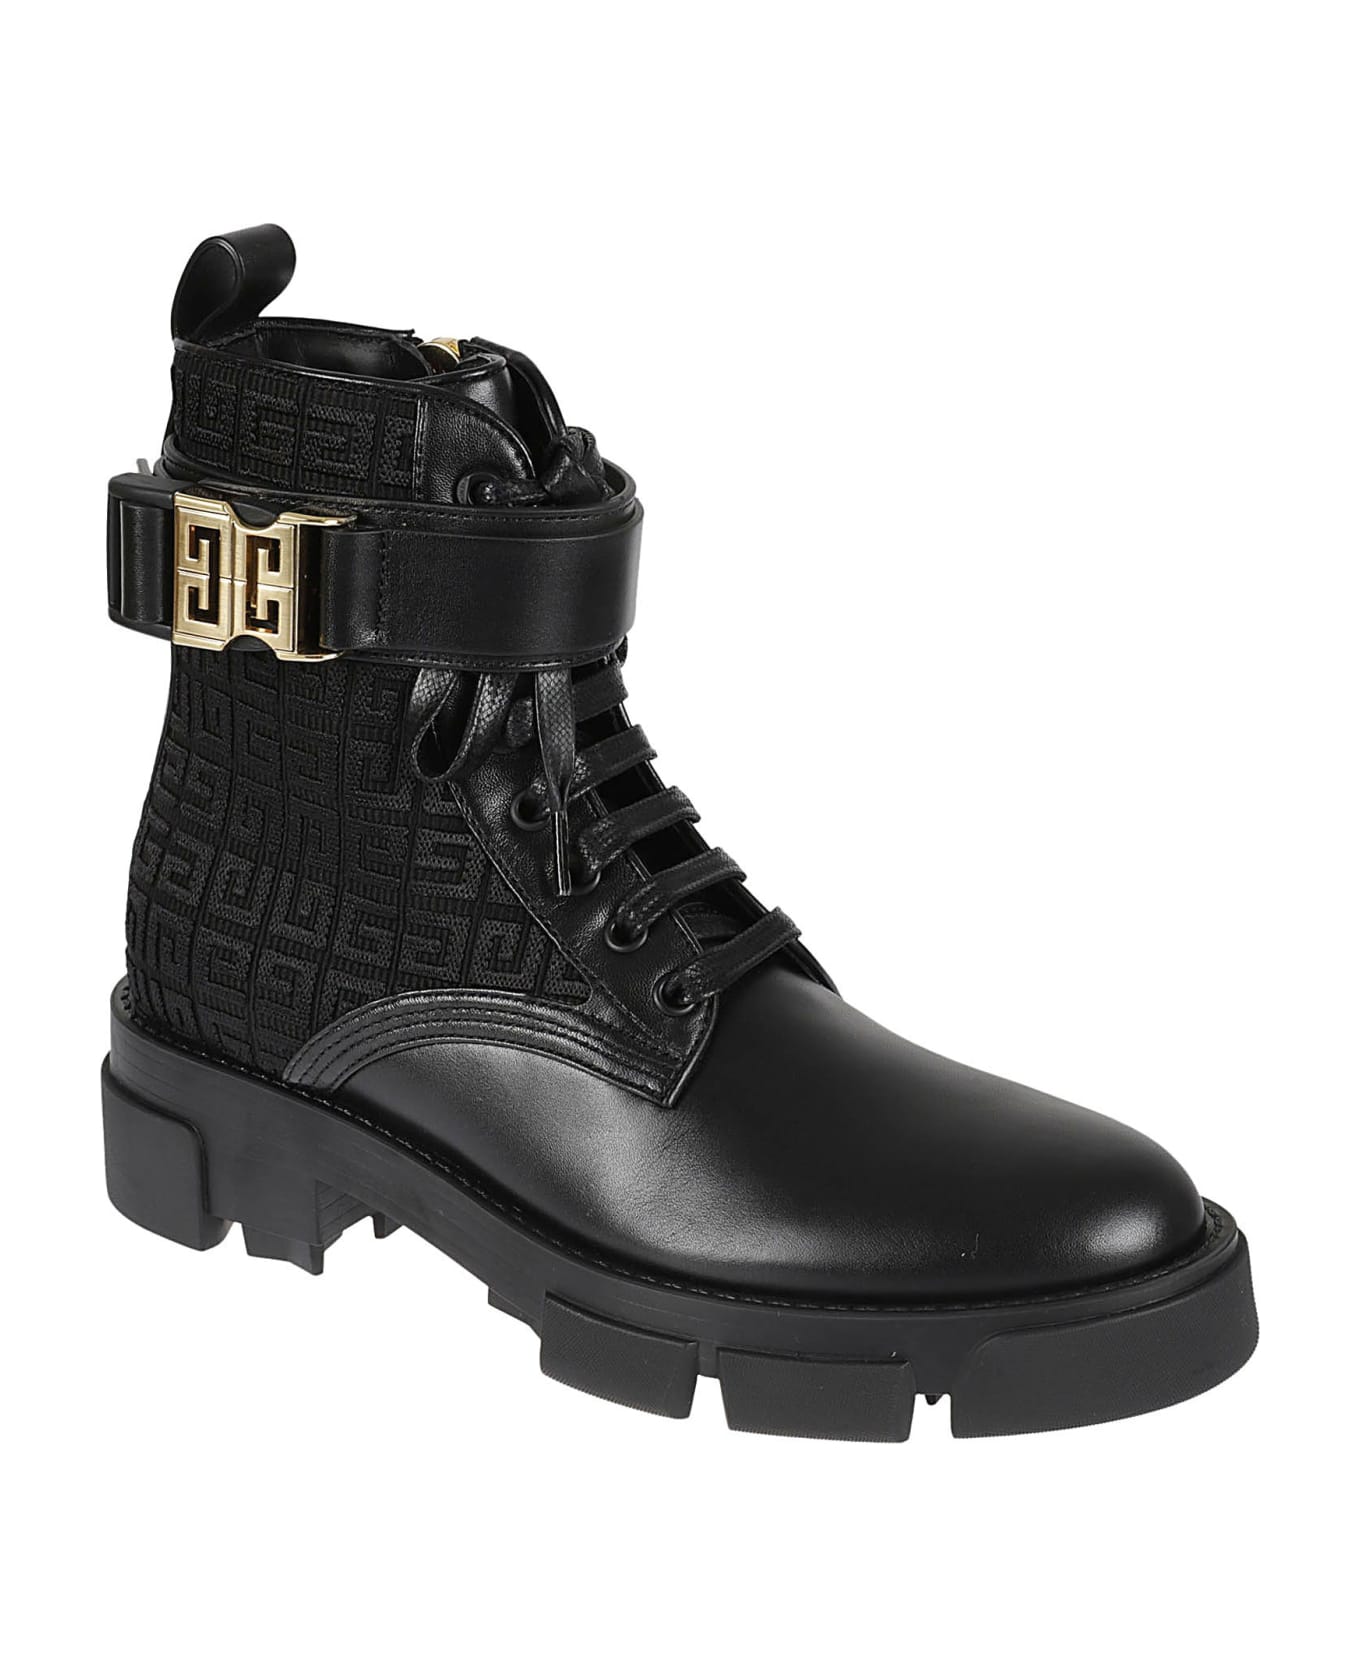 Givenchy Leather Logo Boots - Black